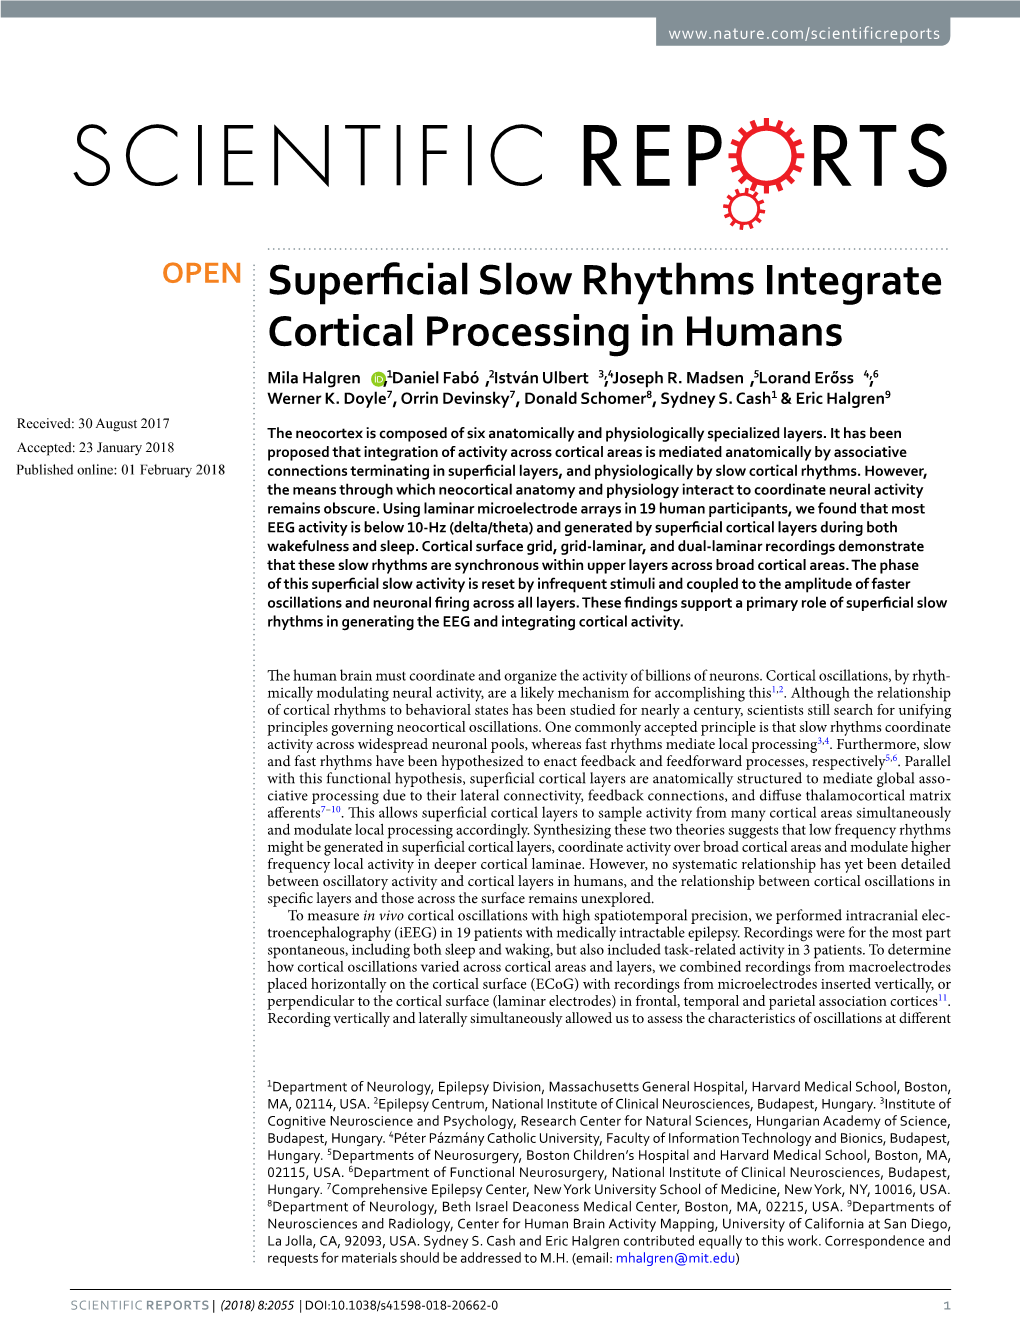 Superficial Slow Rhythms Integrate Cortical Processing in Humans